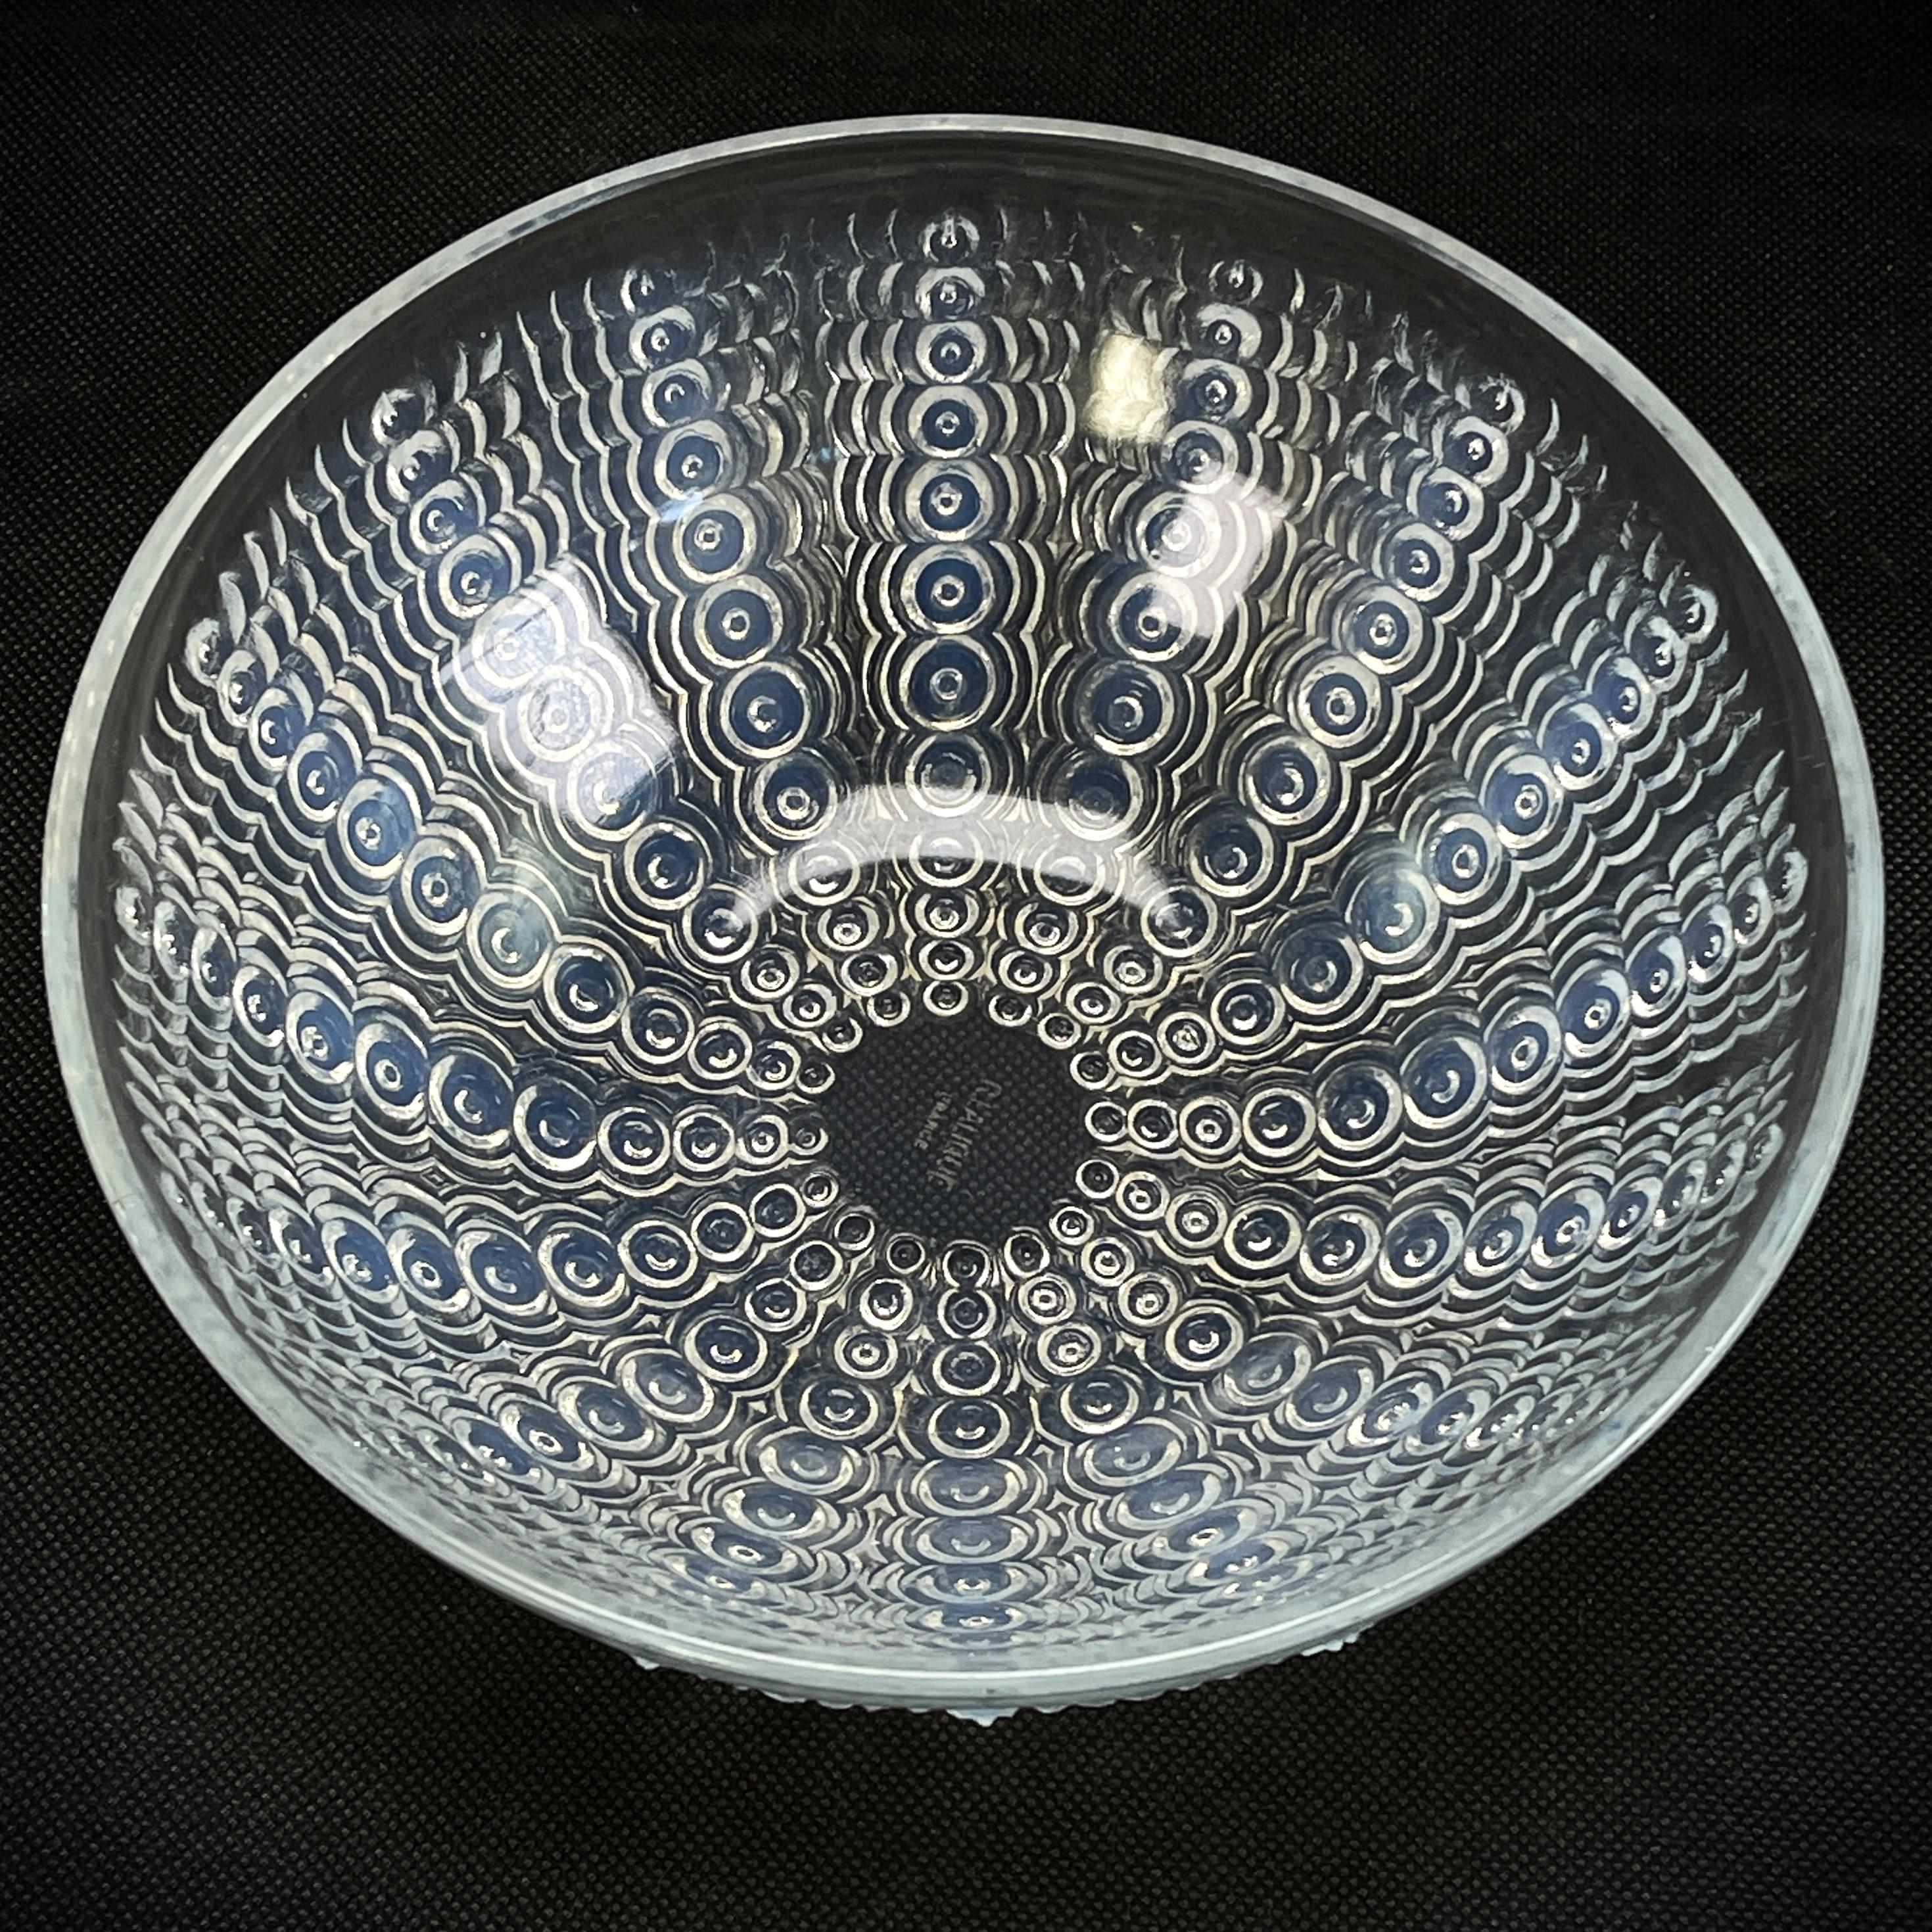 Lalique glas bowl Oursins - 1930s.

This opalescent Glas Bowl from the famous french designer René Lalique is in a brilliant condition. Still today it is a stylish must-have for every Art Deco interior. The signed item is an original out of the